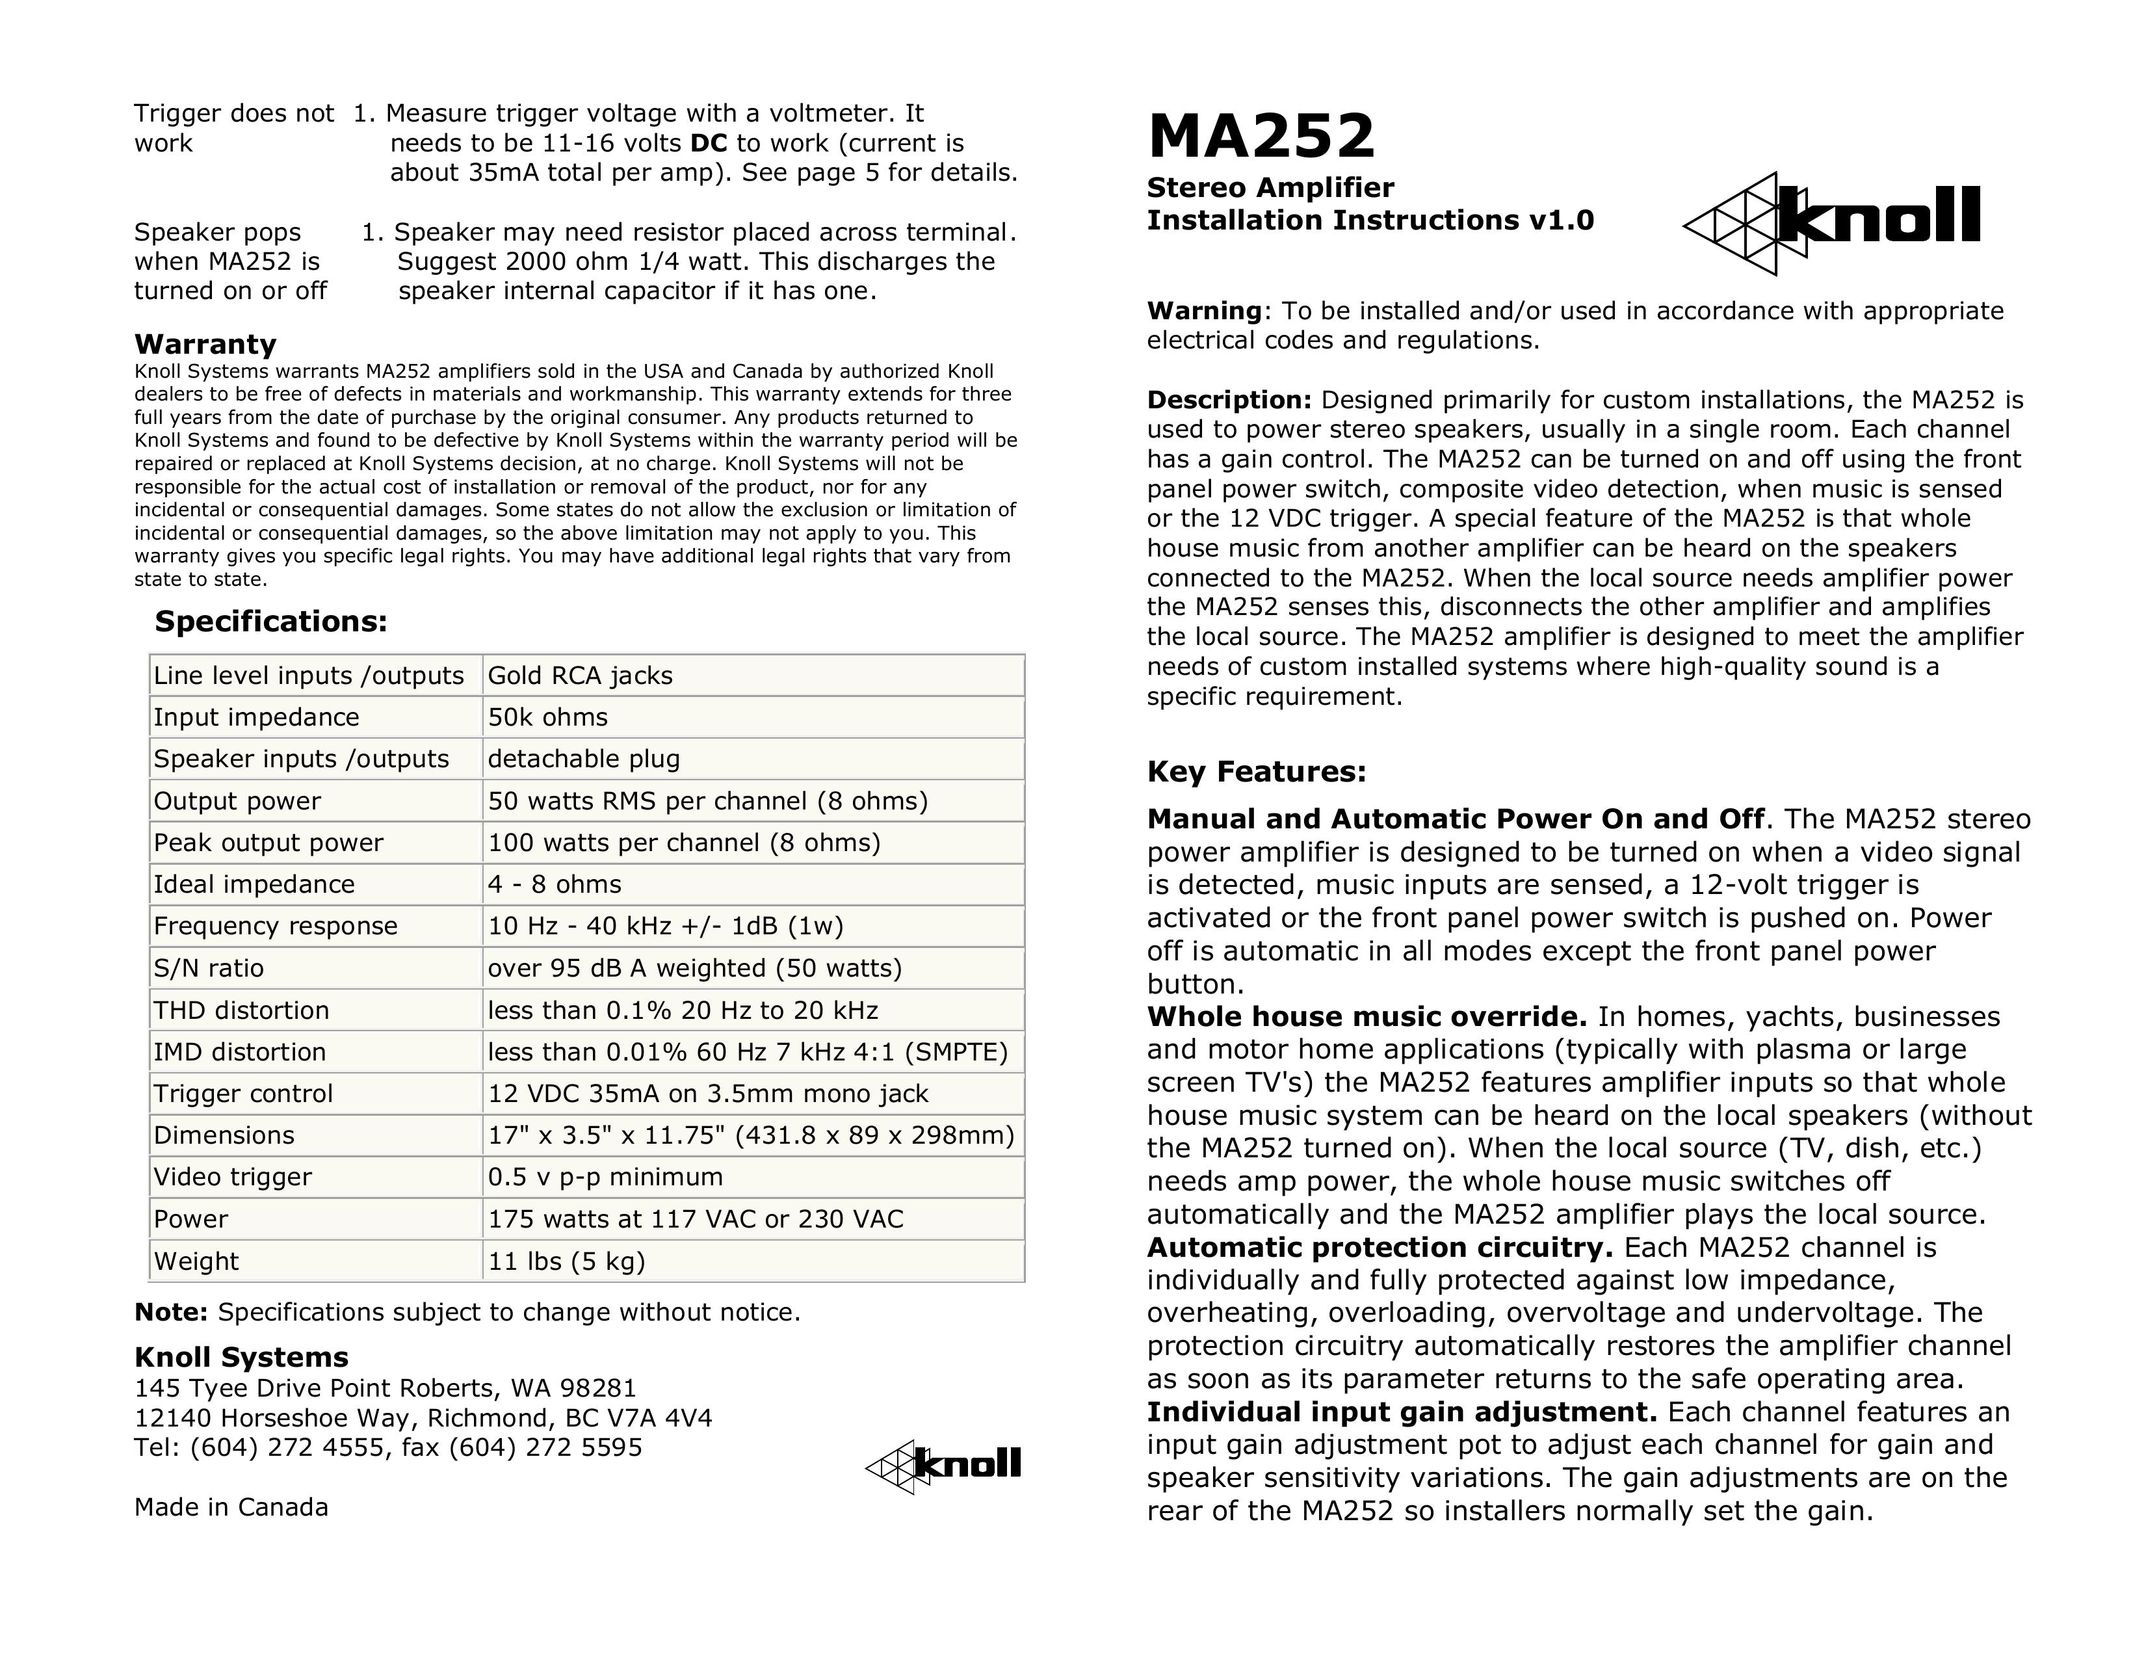 Knoll Systems MA252 Stereo Amplifier User Manual